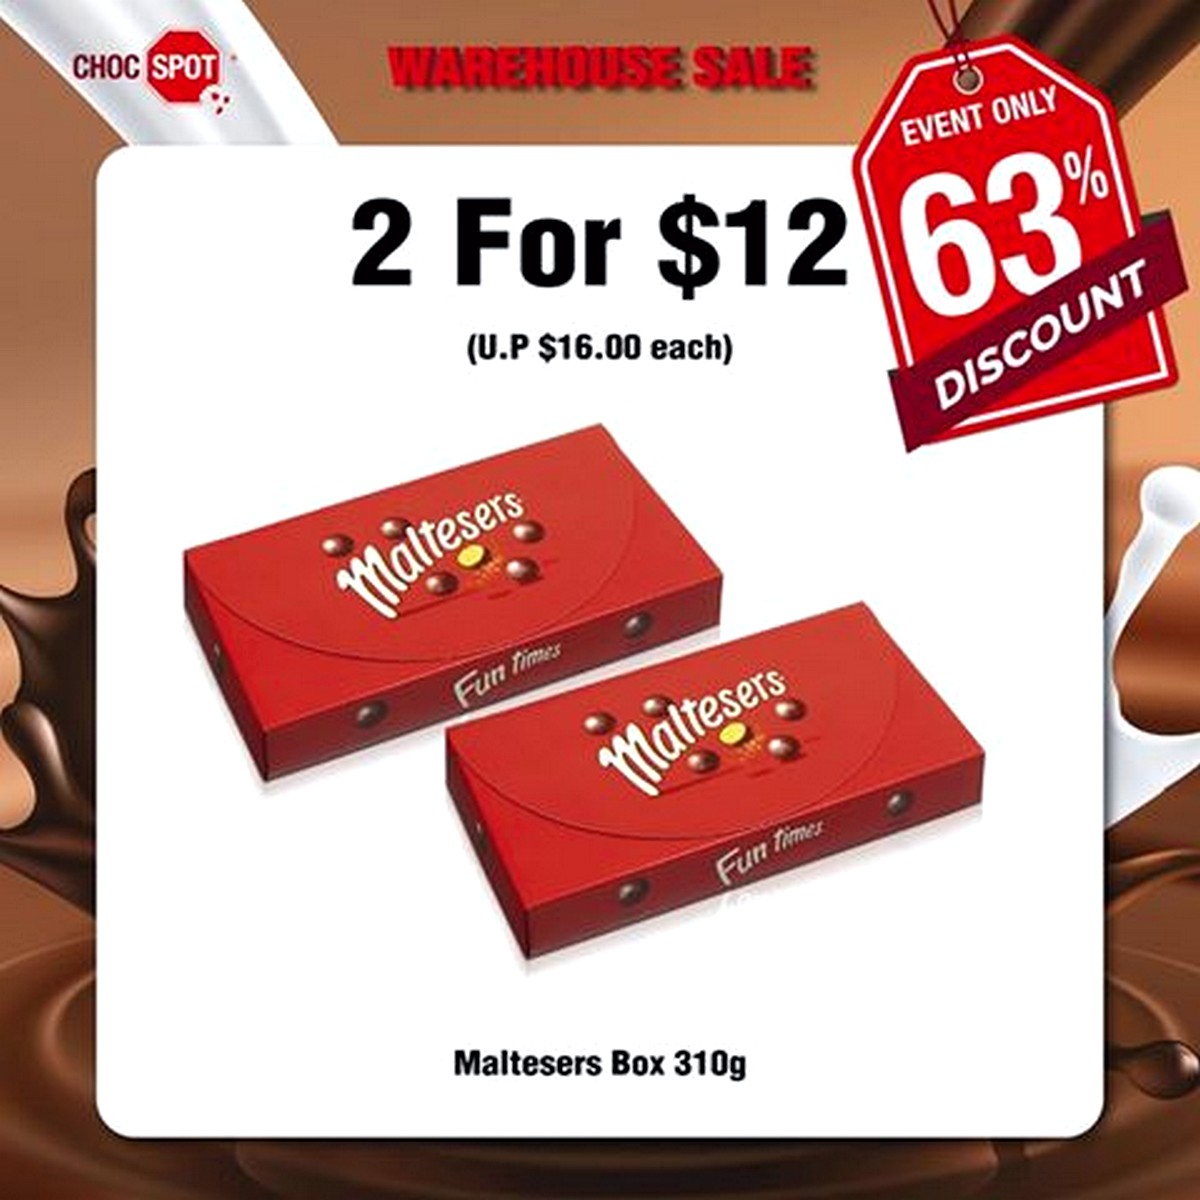 Choc-Spot-Warehouse-Sale-Highlights-008 24 Jul-2 Aug 2020: Choc Spot Warehouse Sale! Up to 80% off Chocolates, Sweets, Chips, Biscuits!